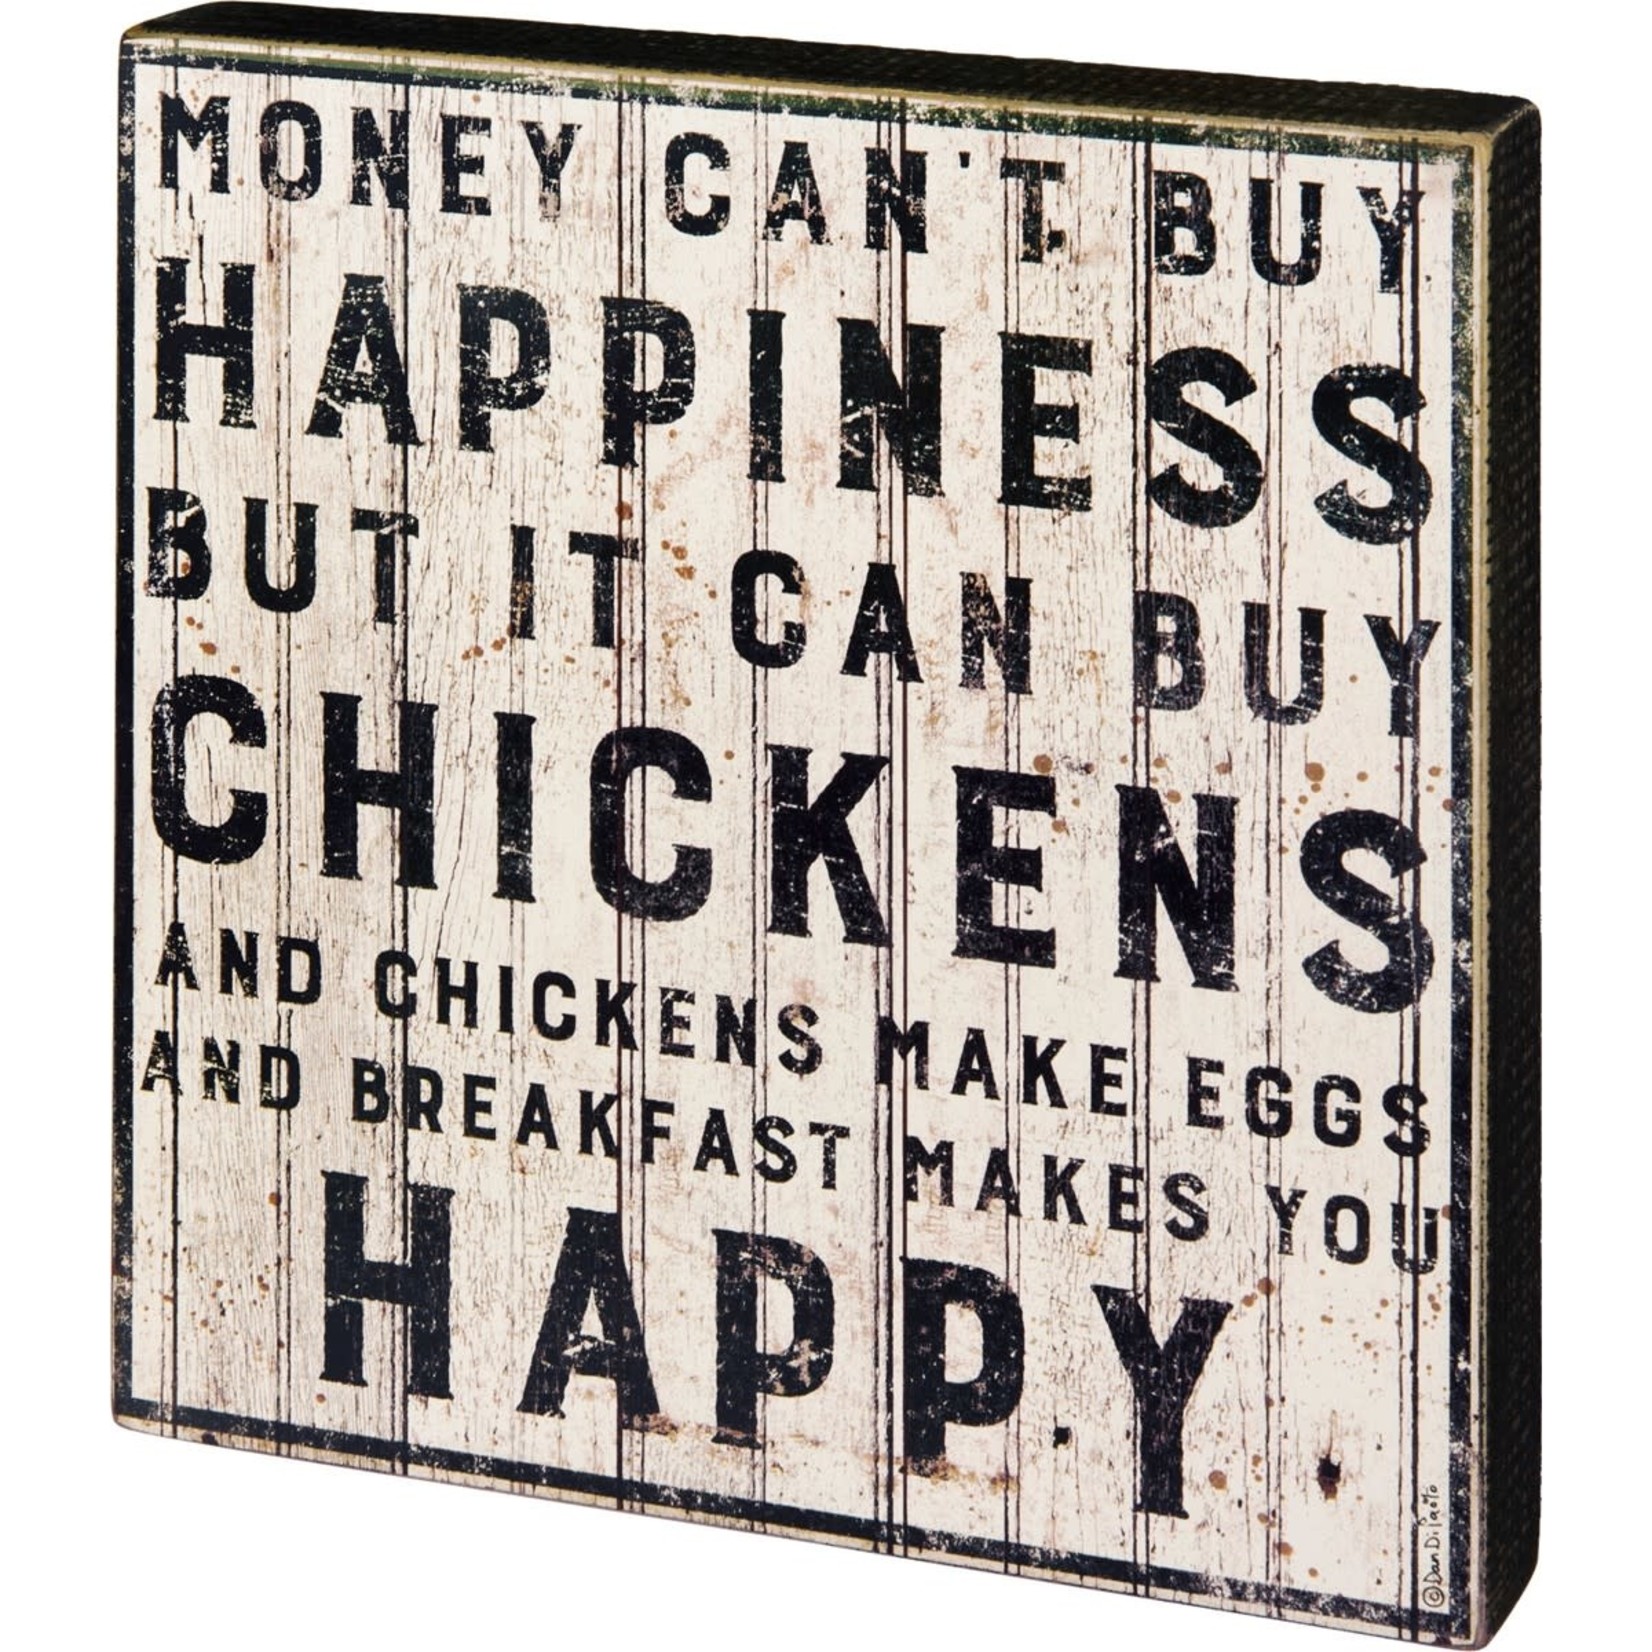 BOX SIGN BUY CHICKENS